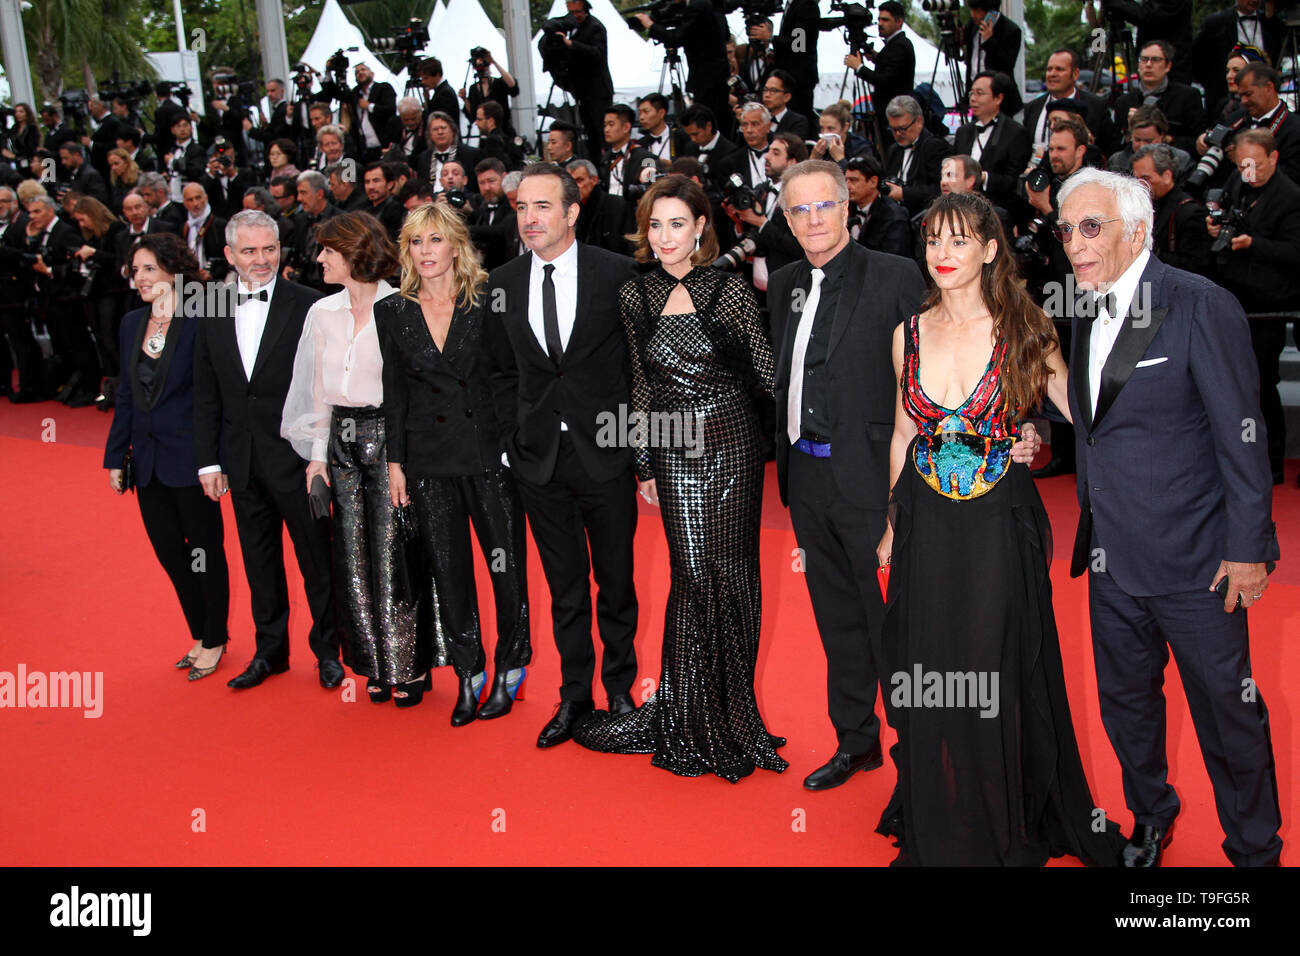 Cannes, France. 18th May, 2019. Mathilde Seignier, Jean Dujardin, Elsa Zilberstein, Christophe Lambert, Gerard Darmon, Irene Jacob and Audrey Dana arrives to the premiere of 'LES PLUS BELLES ANNÉES D'UNE VIE' during the 2019 Cannes Film Festival on May 18, 2019 at Palais des Festivals in Cannes, France. ( Credit: Lyvans Boolaky/Image Space/Media Punch)/Alamy Live News Stock Photo